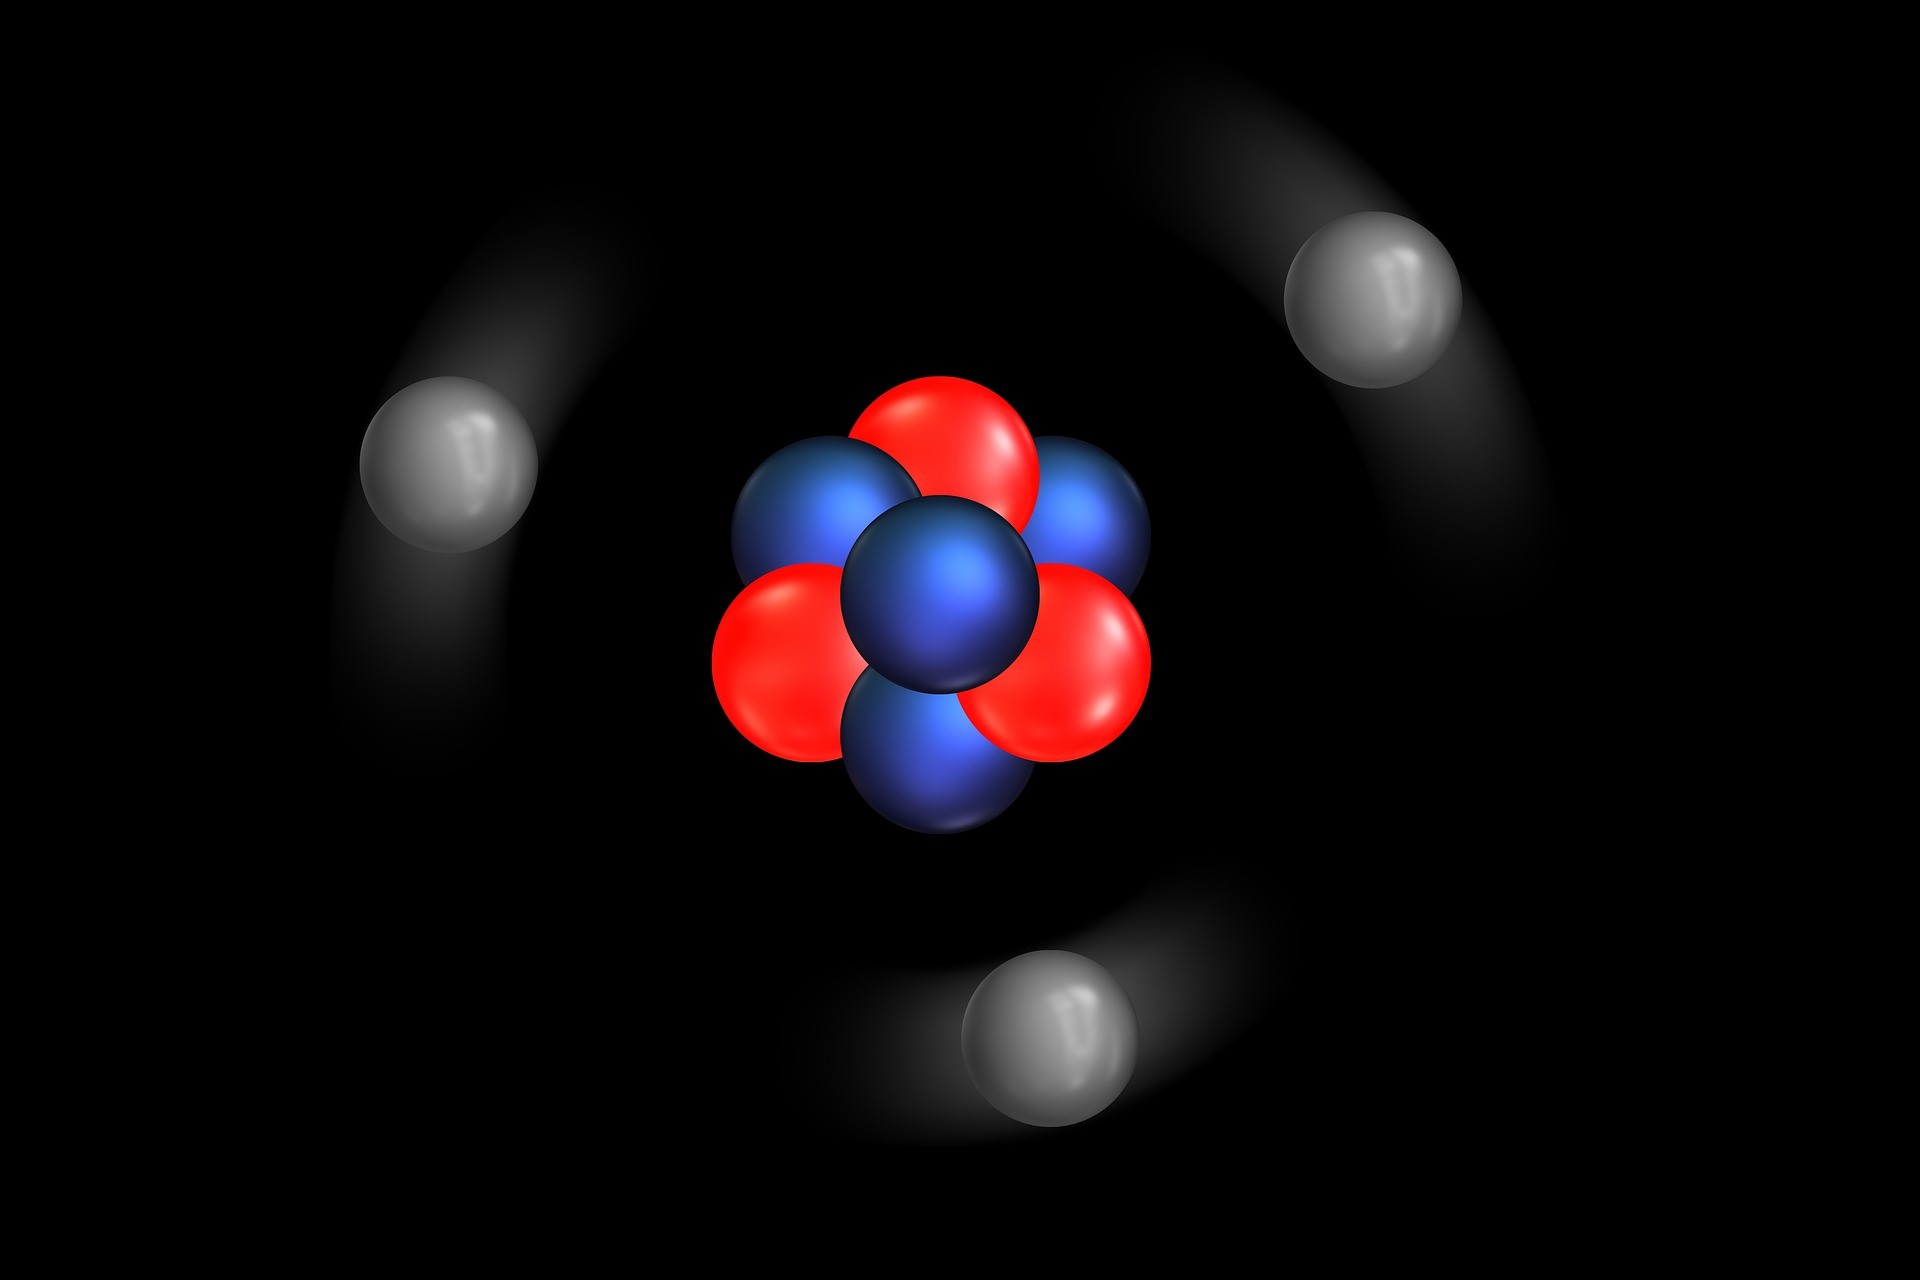 inorganic chemistry showing the structure of lithium